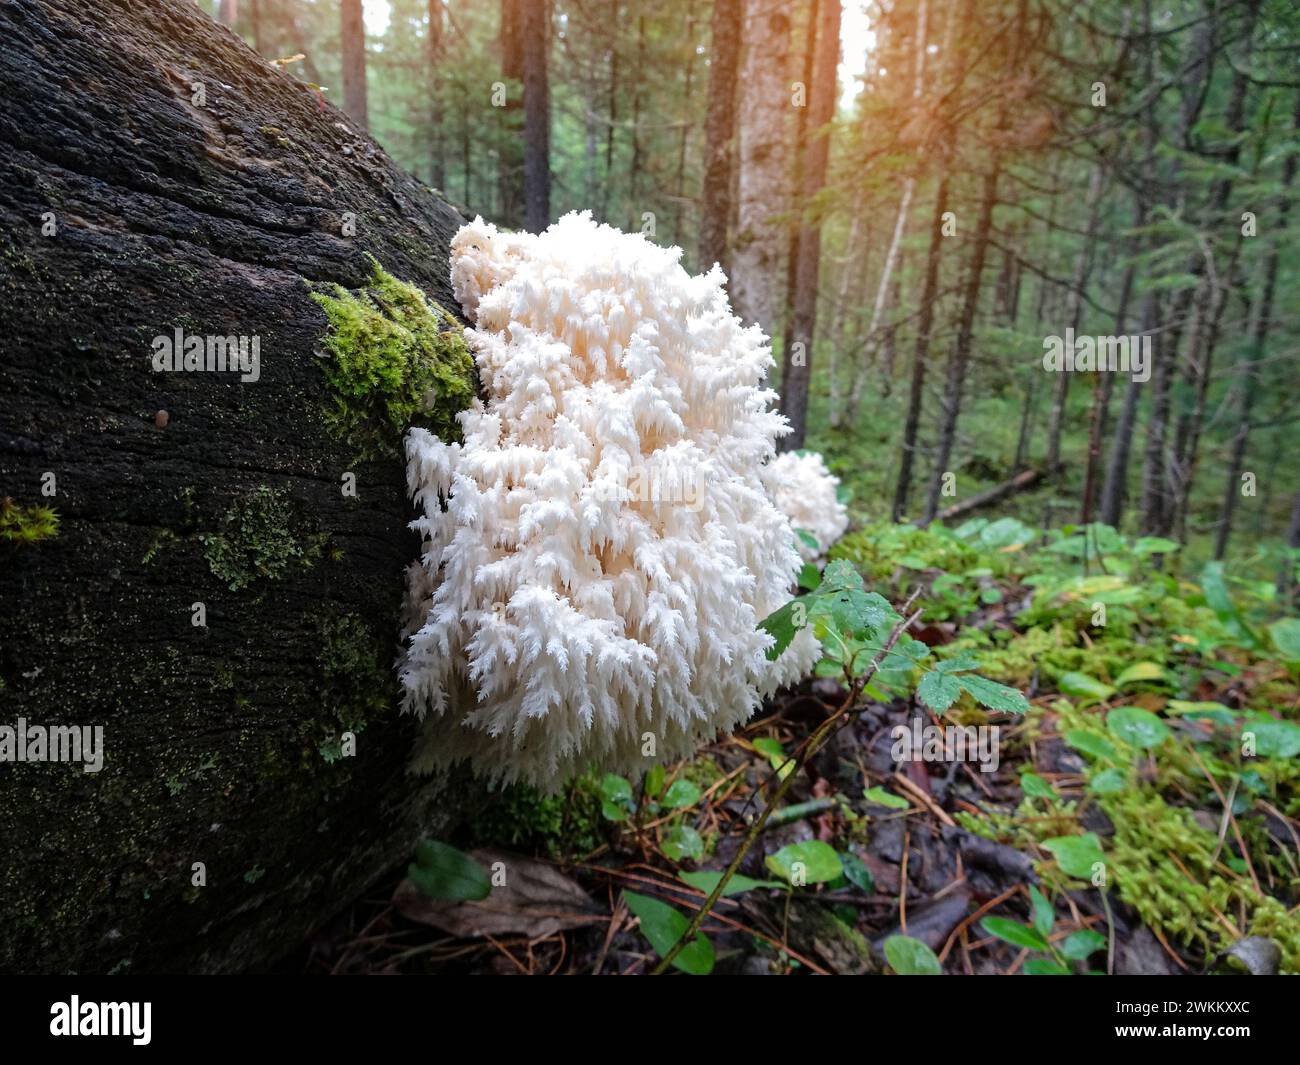 Coral tooth fungus (Hericium coralloides) on a dead tree trunk. Unusual saprotrophic fungus. Stock Photo